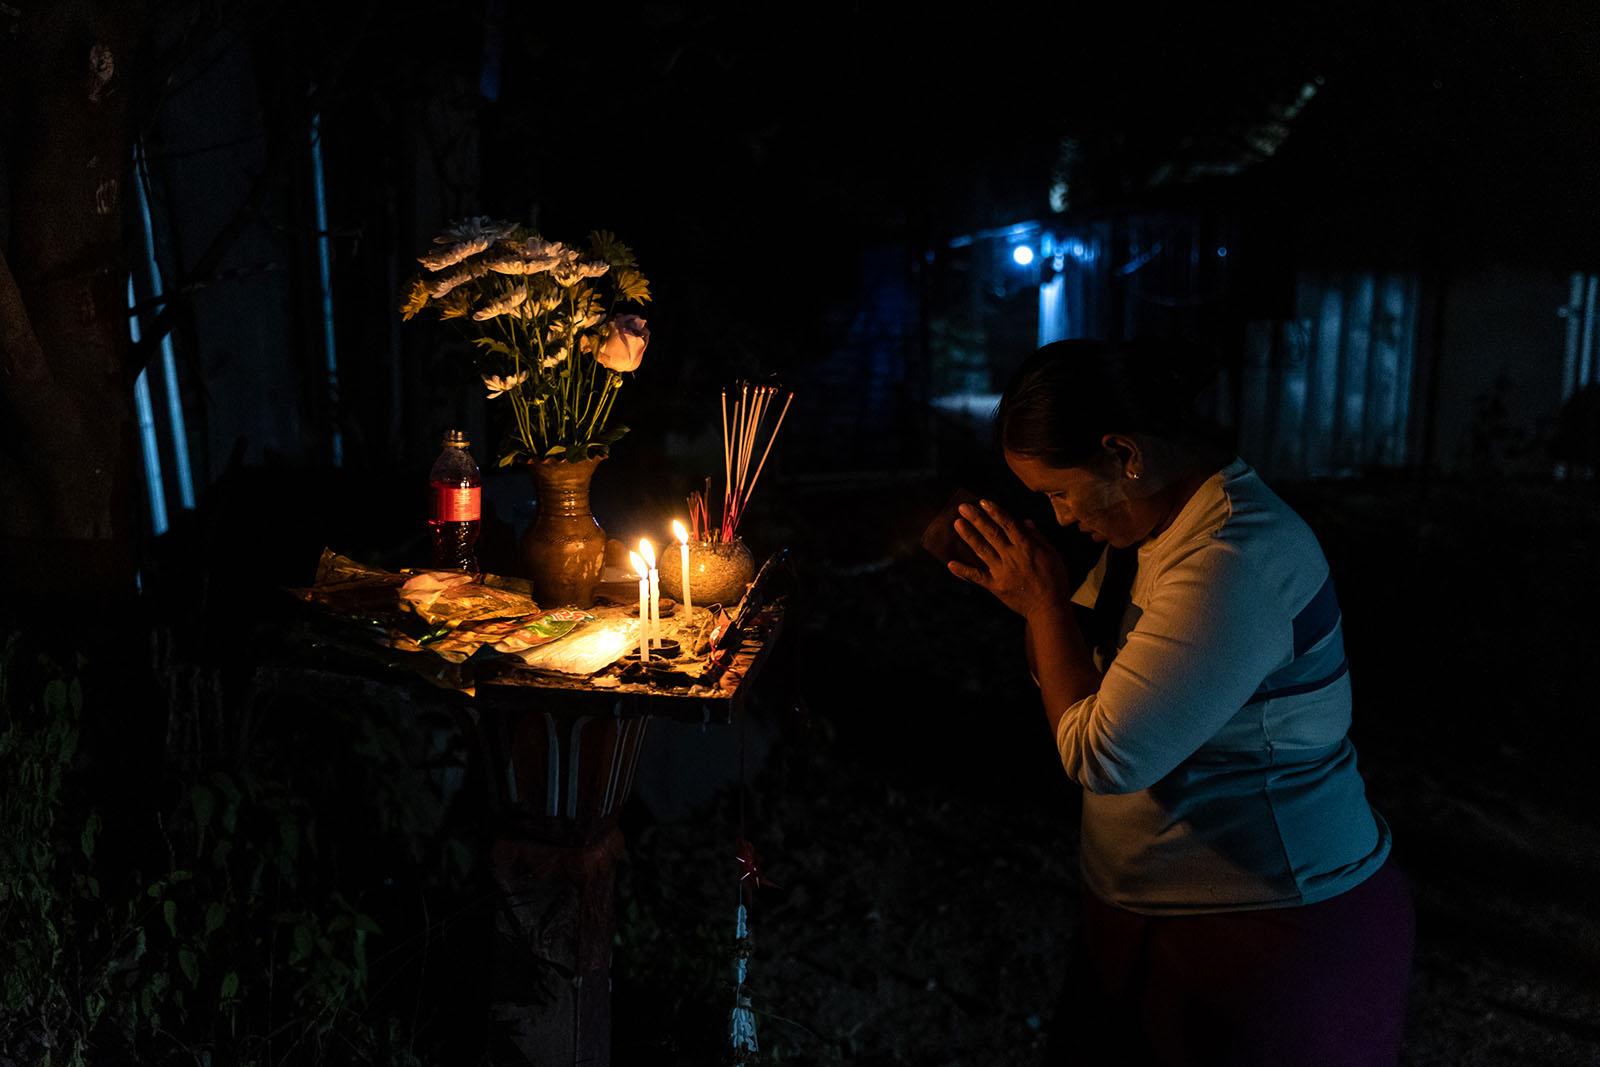 LIFE ON THE OTHER SIDE - Chiang Rai - Migrant worker Thin Thin Maw, 37, prays at a...